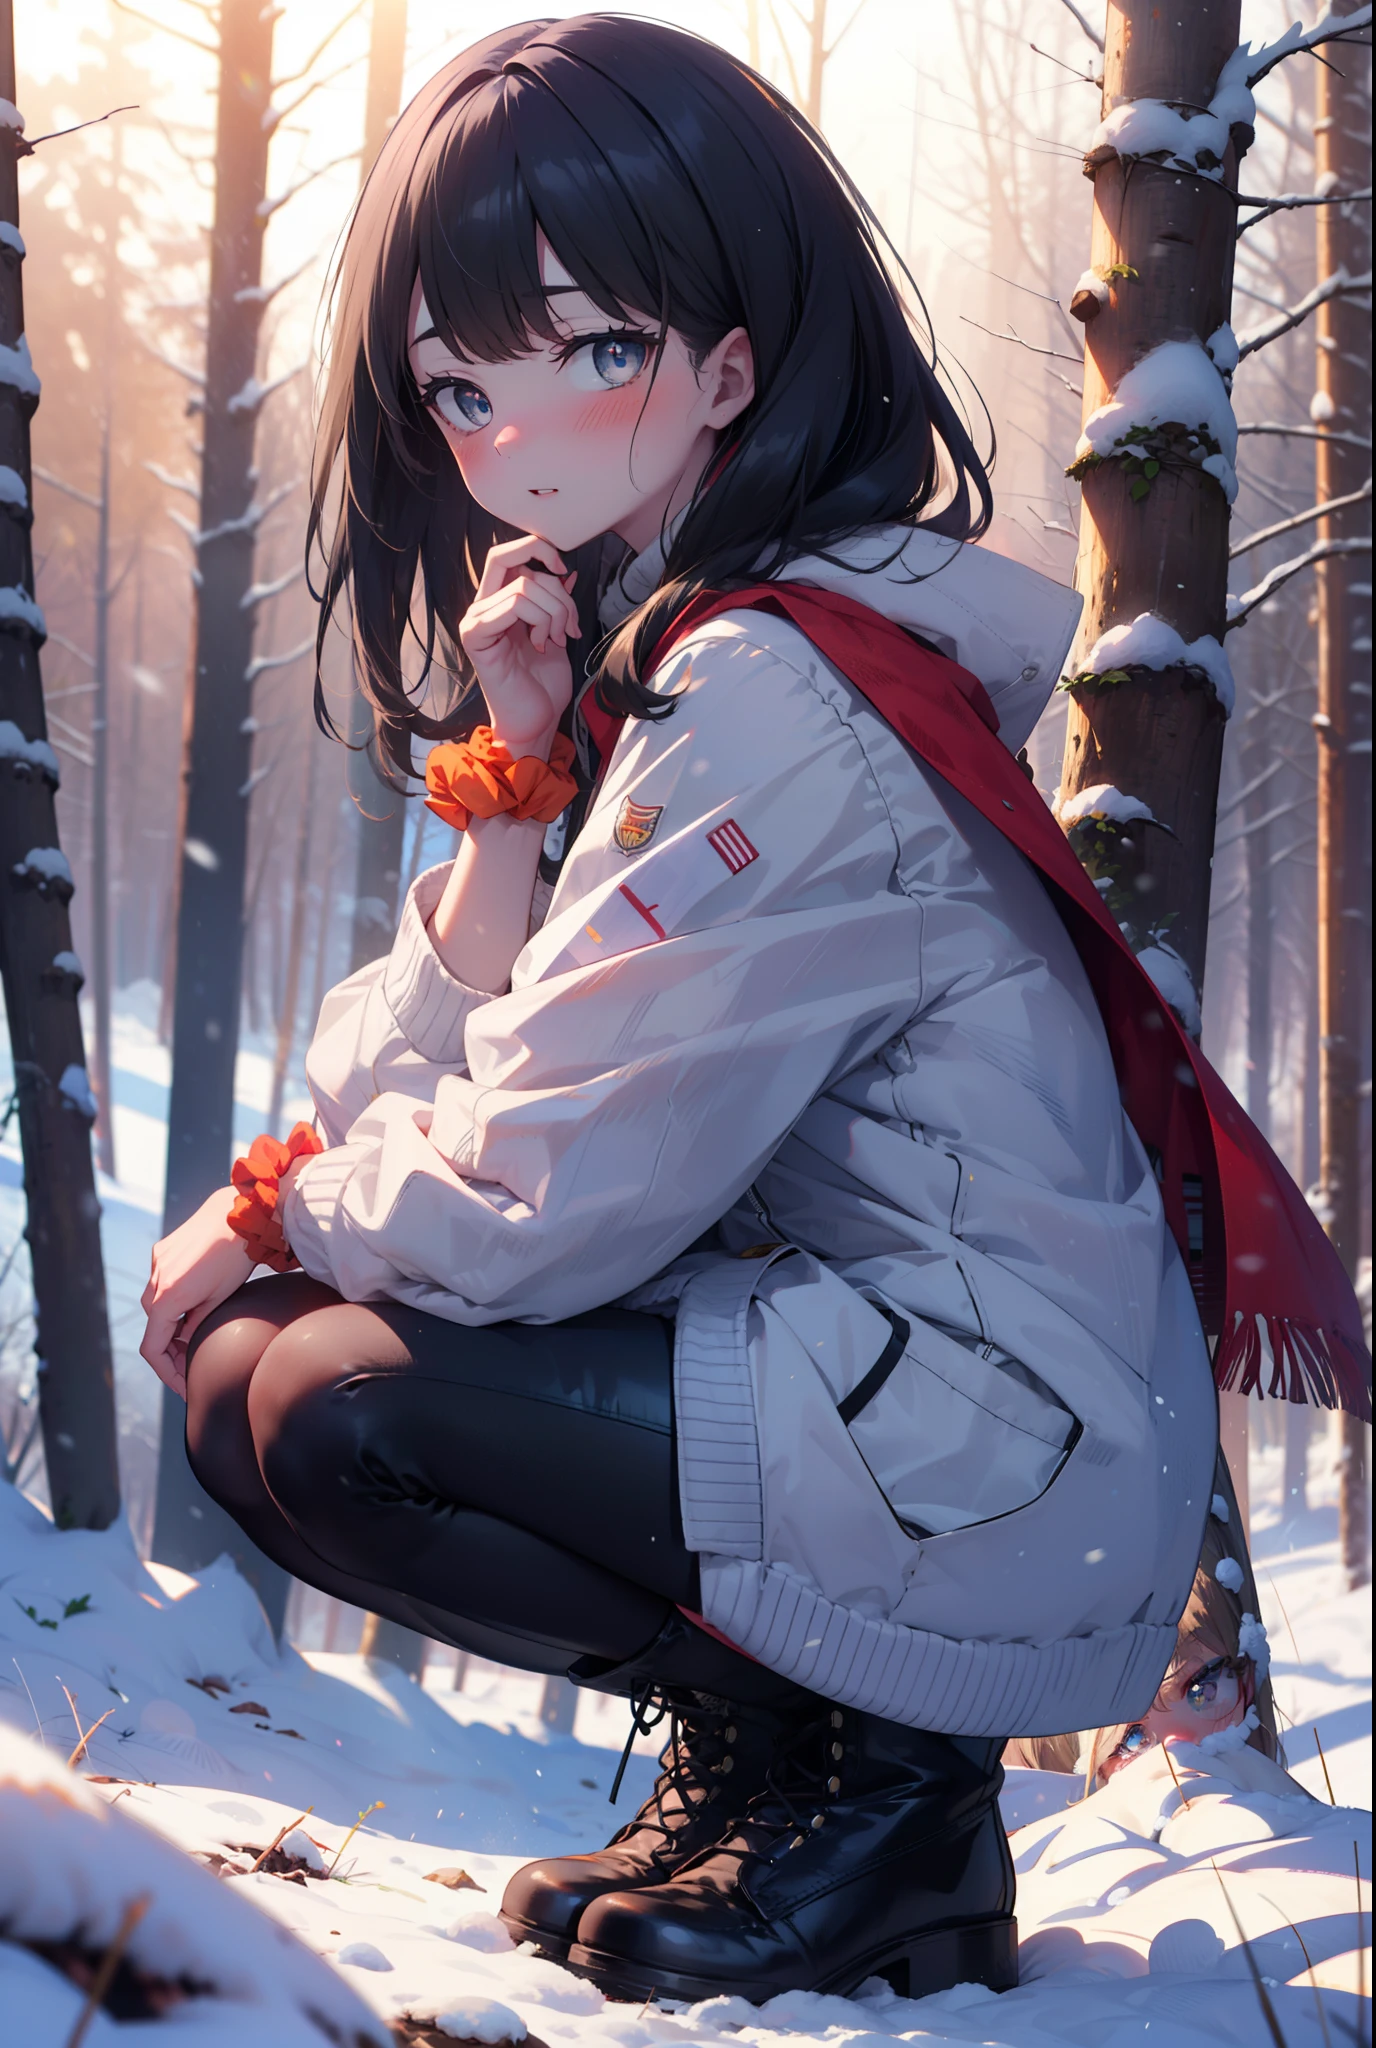 6 flowers, rikka takarada, Black Hair, blue eyes, Long Hair, orange Scrunchie, Scrunchie, wrist Scrunchie,smile,blush,White Breath,
Open your mouth,snow,Ground bonfire, Outdoor, boots, snowing, From the side, wood, suitcase, Cape, Blurred, Increase your meals, forest, White handbag, nature,  Squat, Mouth closed, フードed Cape, winter, Written boundary depth, Black shoes, red Cape break looking at viewer, Upper Body, whole body, break Outdoor, forest, nature, break (masterpiece:1.2), highest quality, High resolution, unity 8k wallpaper, (shape:0.8), (Beautiful and beautiful eyes:1.6), Highly detailed face, Perfect lighting, Highly detailed CG, (Perfect hands, Perfect Anatomy),